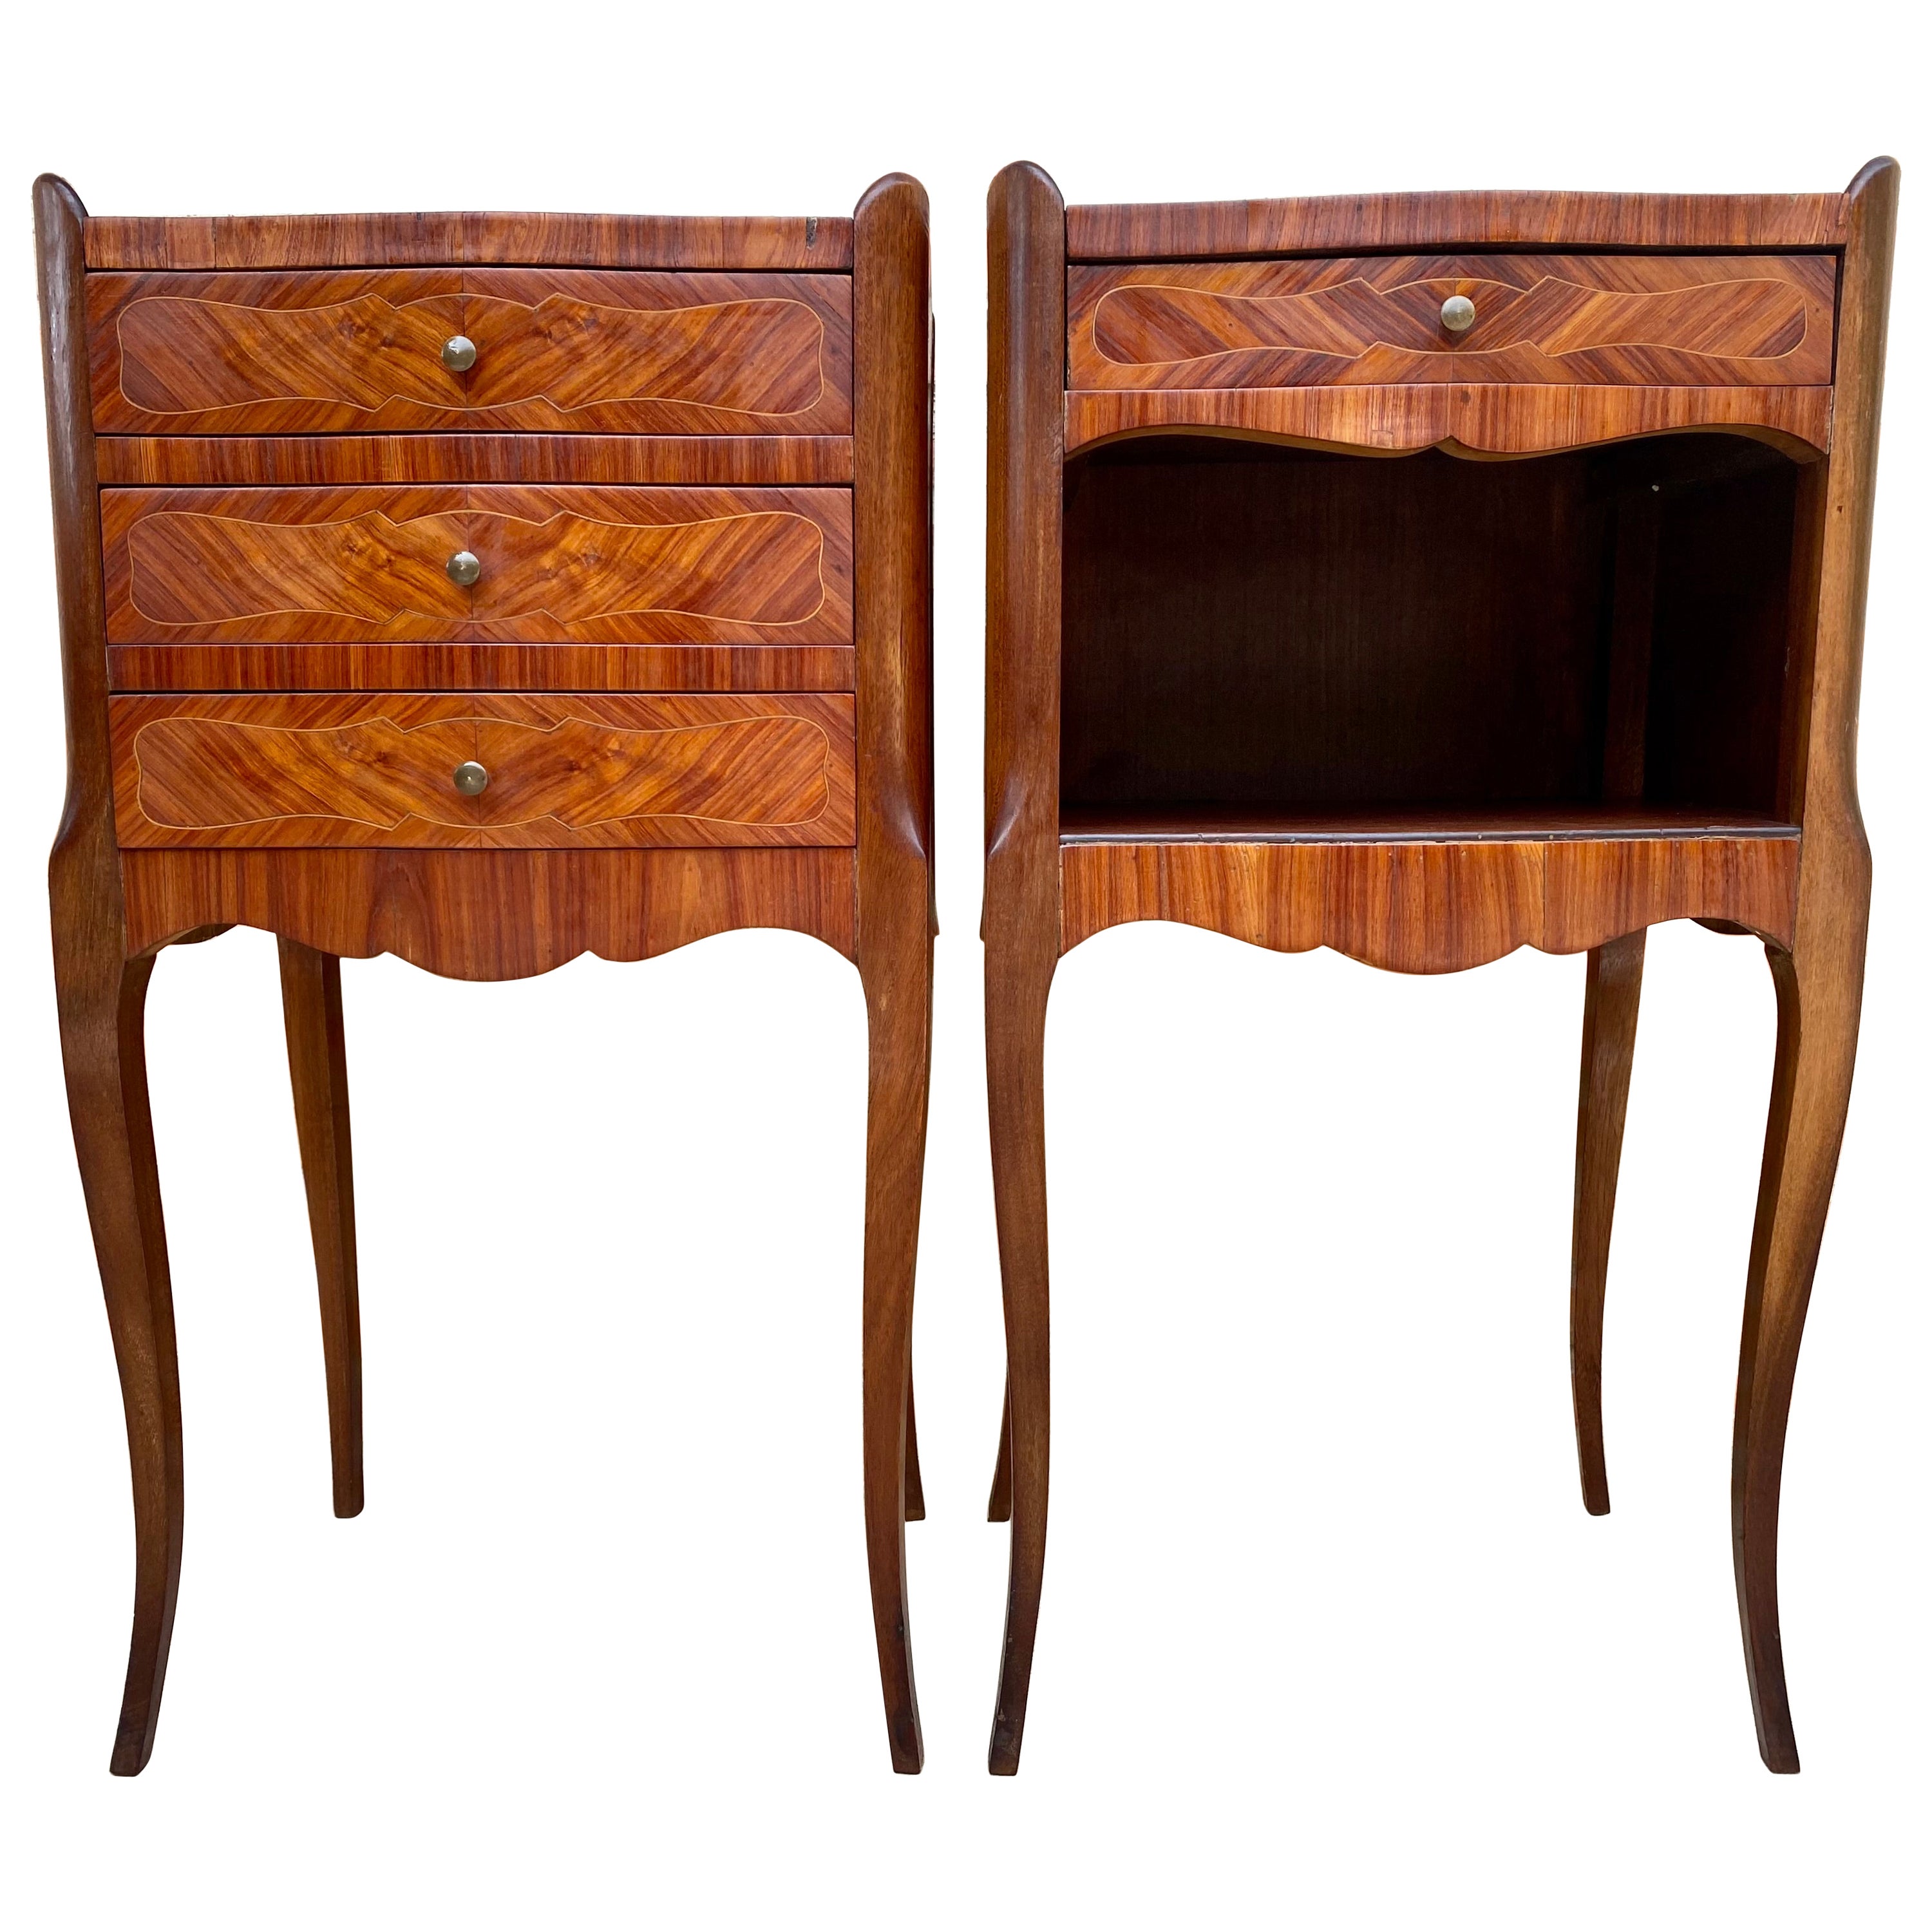 Early 20th Century French Marquetry and Iron Hardware Bedside Tables or Nightsta For Sale